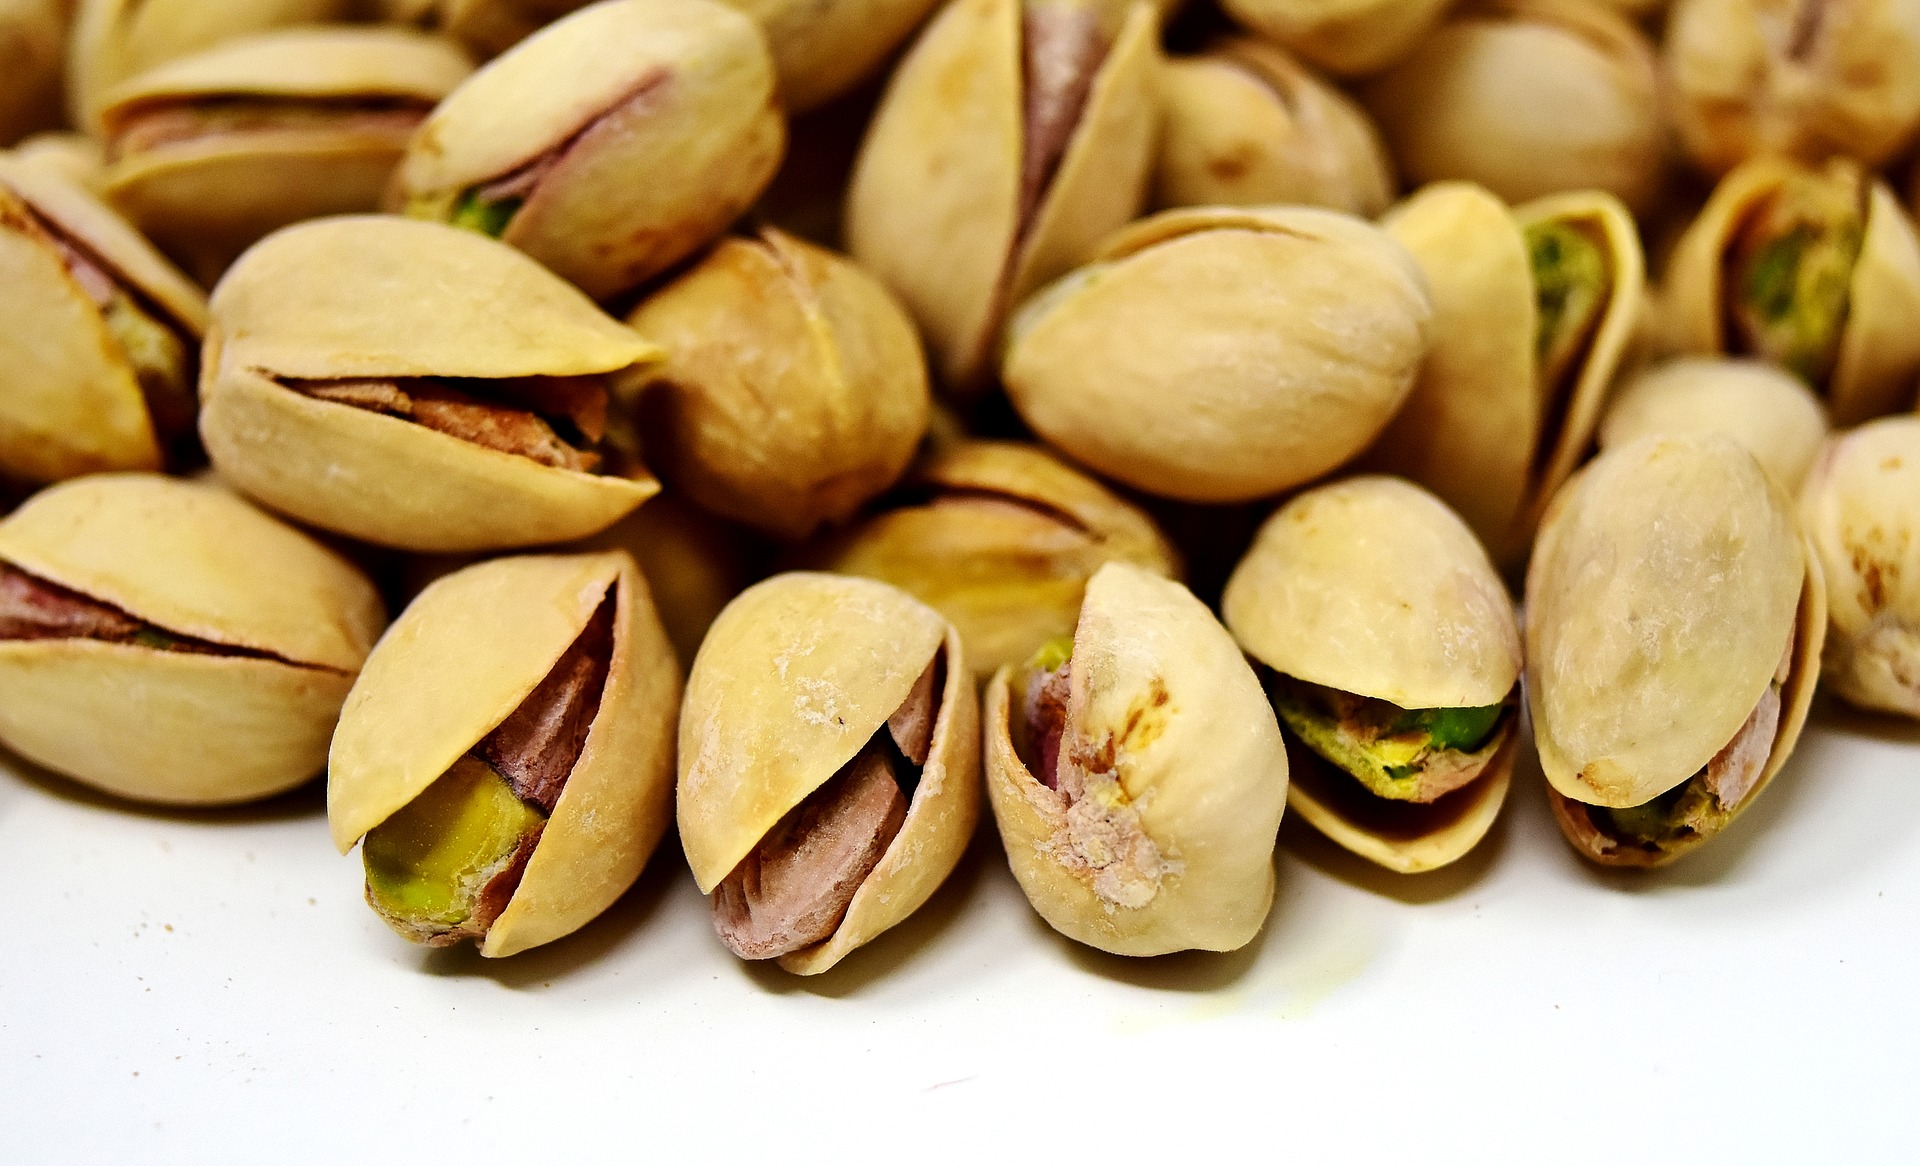 Partially opened pistachios